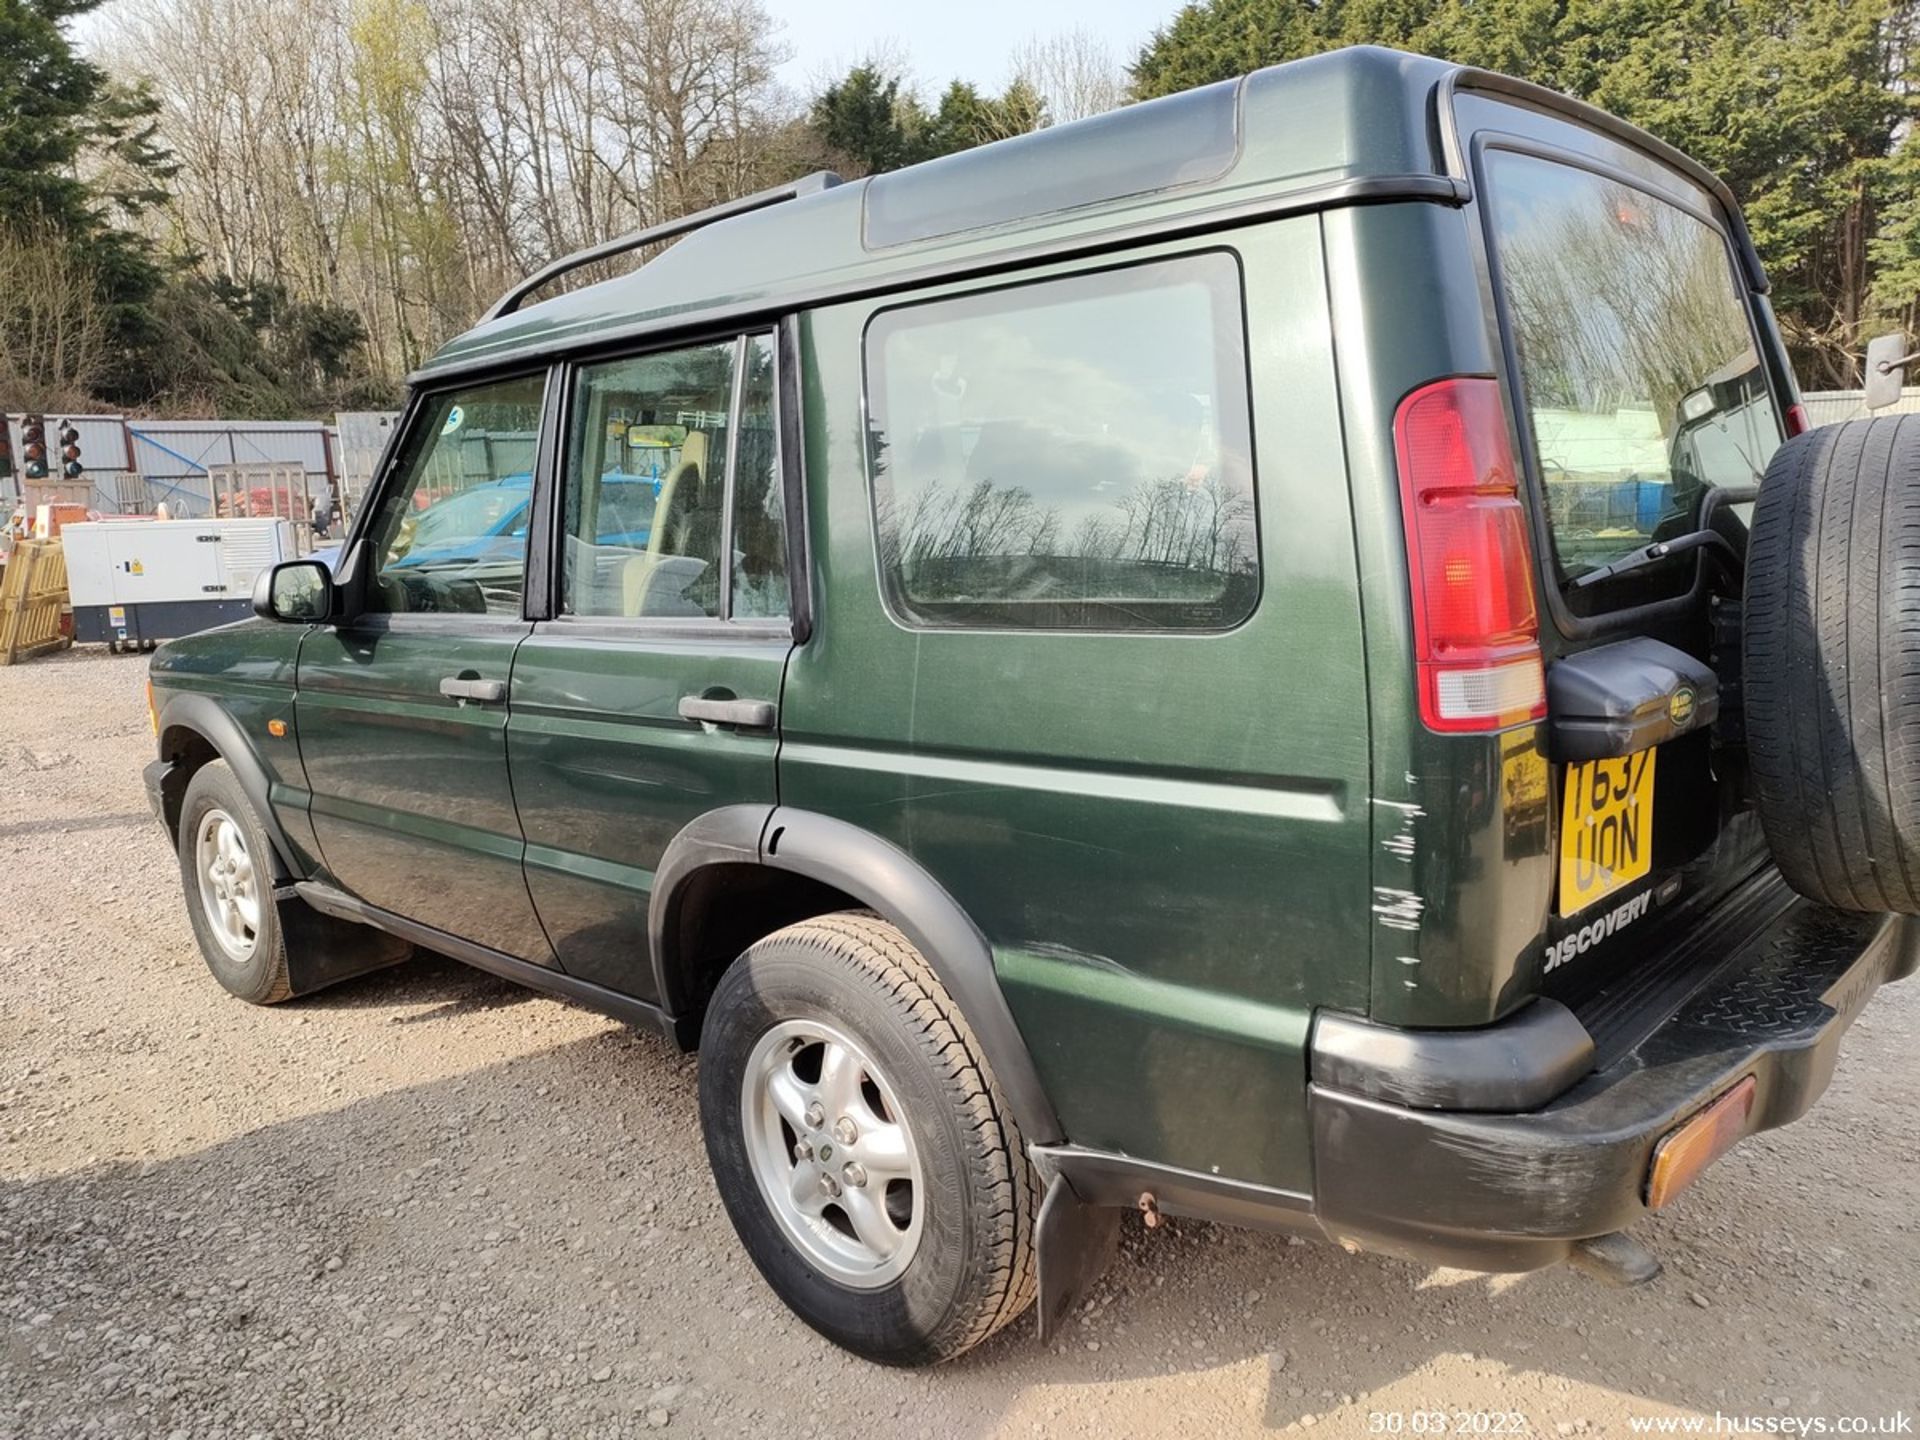 1999 LAND ROVER DISCOVERY TD5 GS - 2495cc 5dr Estate (Green) - Image 7 of 18